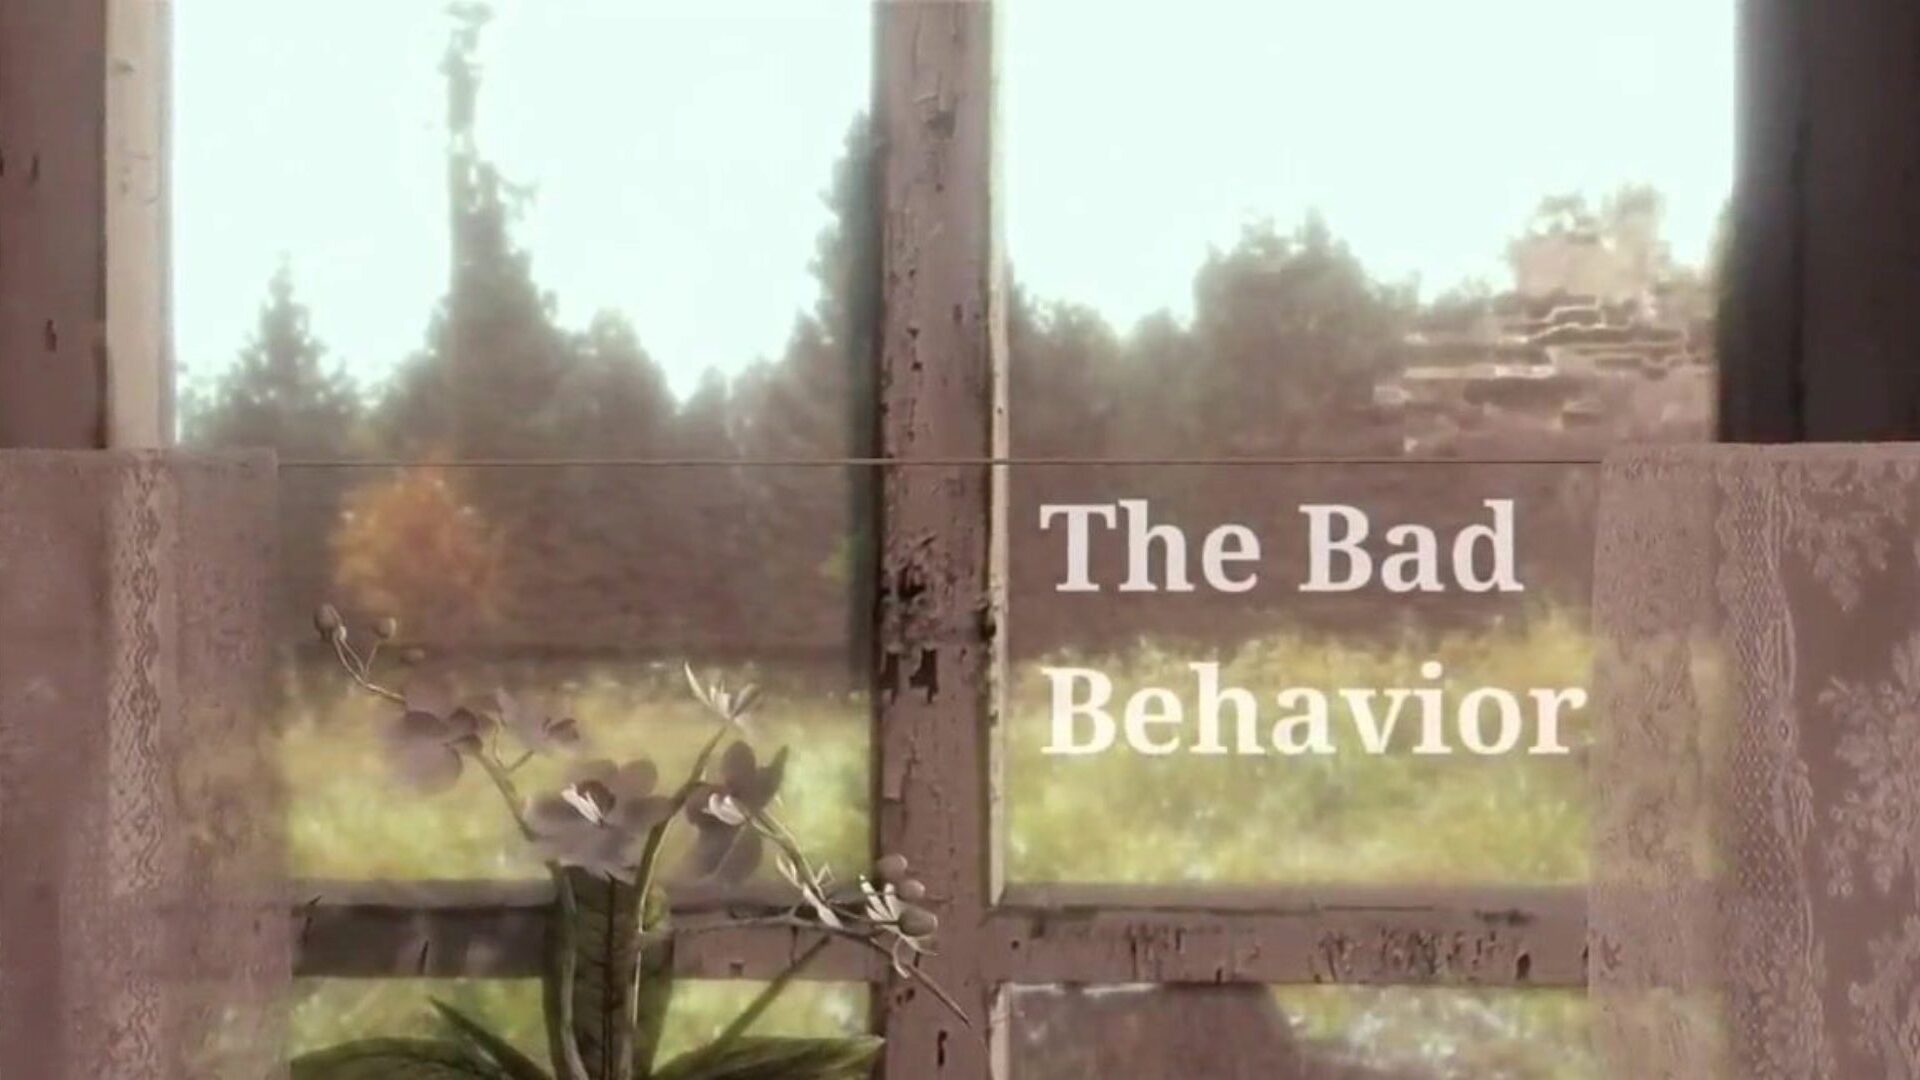 The Bad Behavior: Free 60 FPS HD Porn Video cg - xHamster Watch The Bad Behavior tube orgy episode for free on xHamster, with the sexiest collection of 60 FPS & Hentai HD porn episode scenes